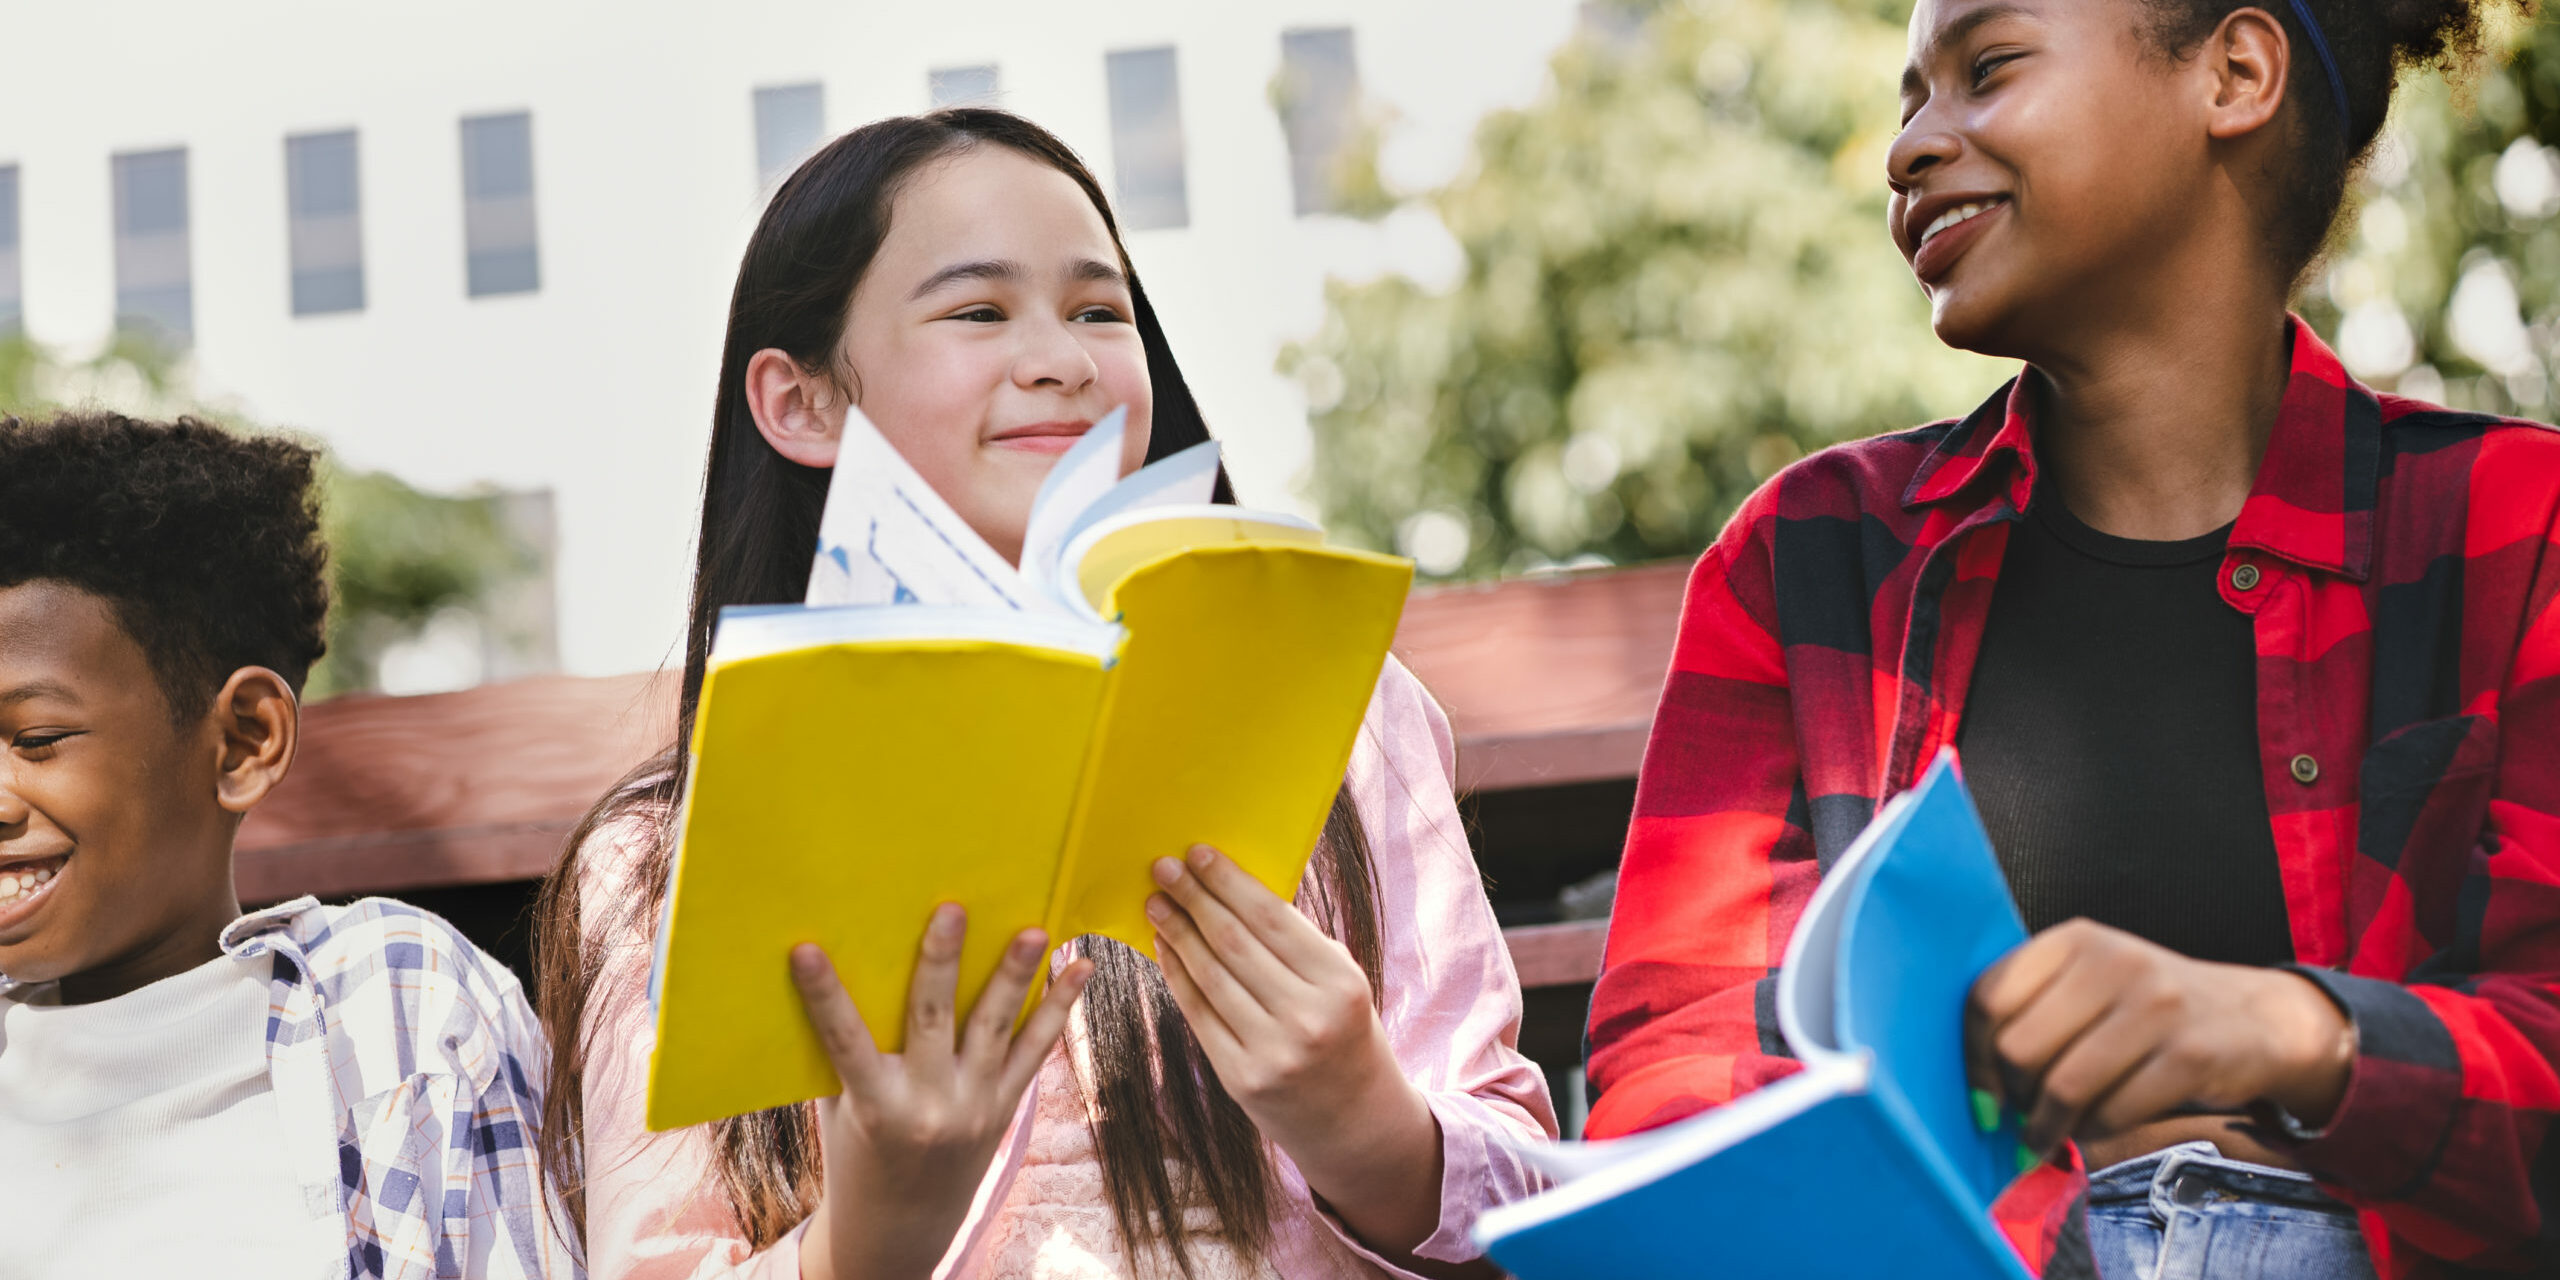 student-girl-reading-book-with-friend-at-school-park